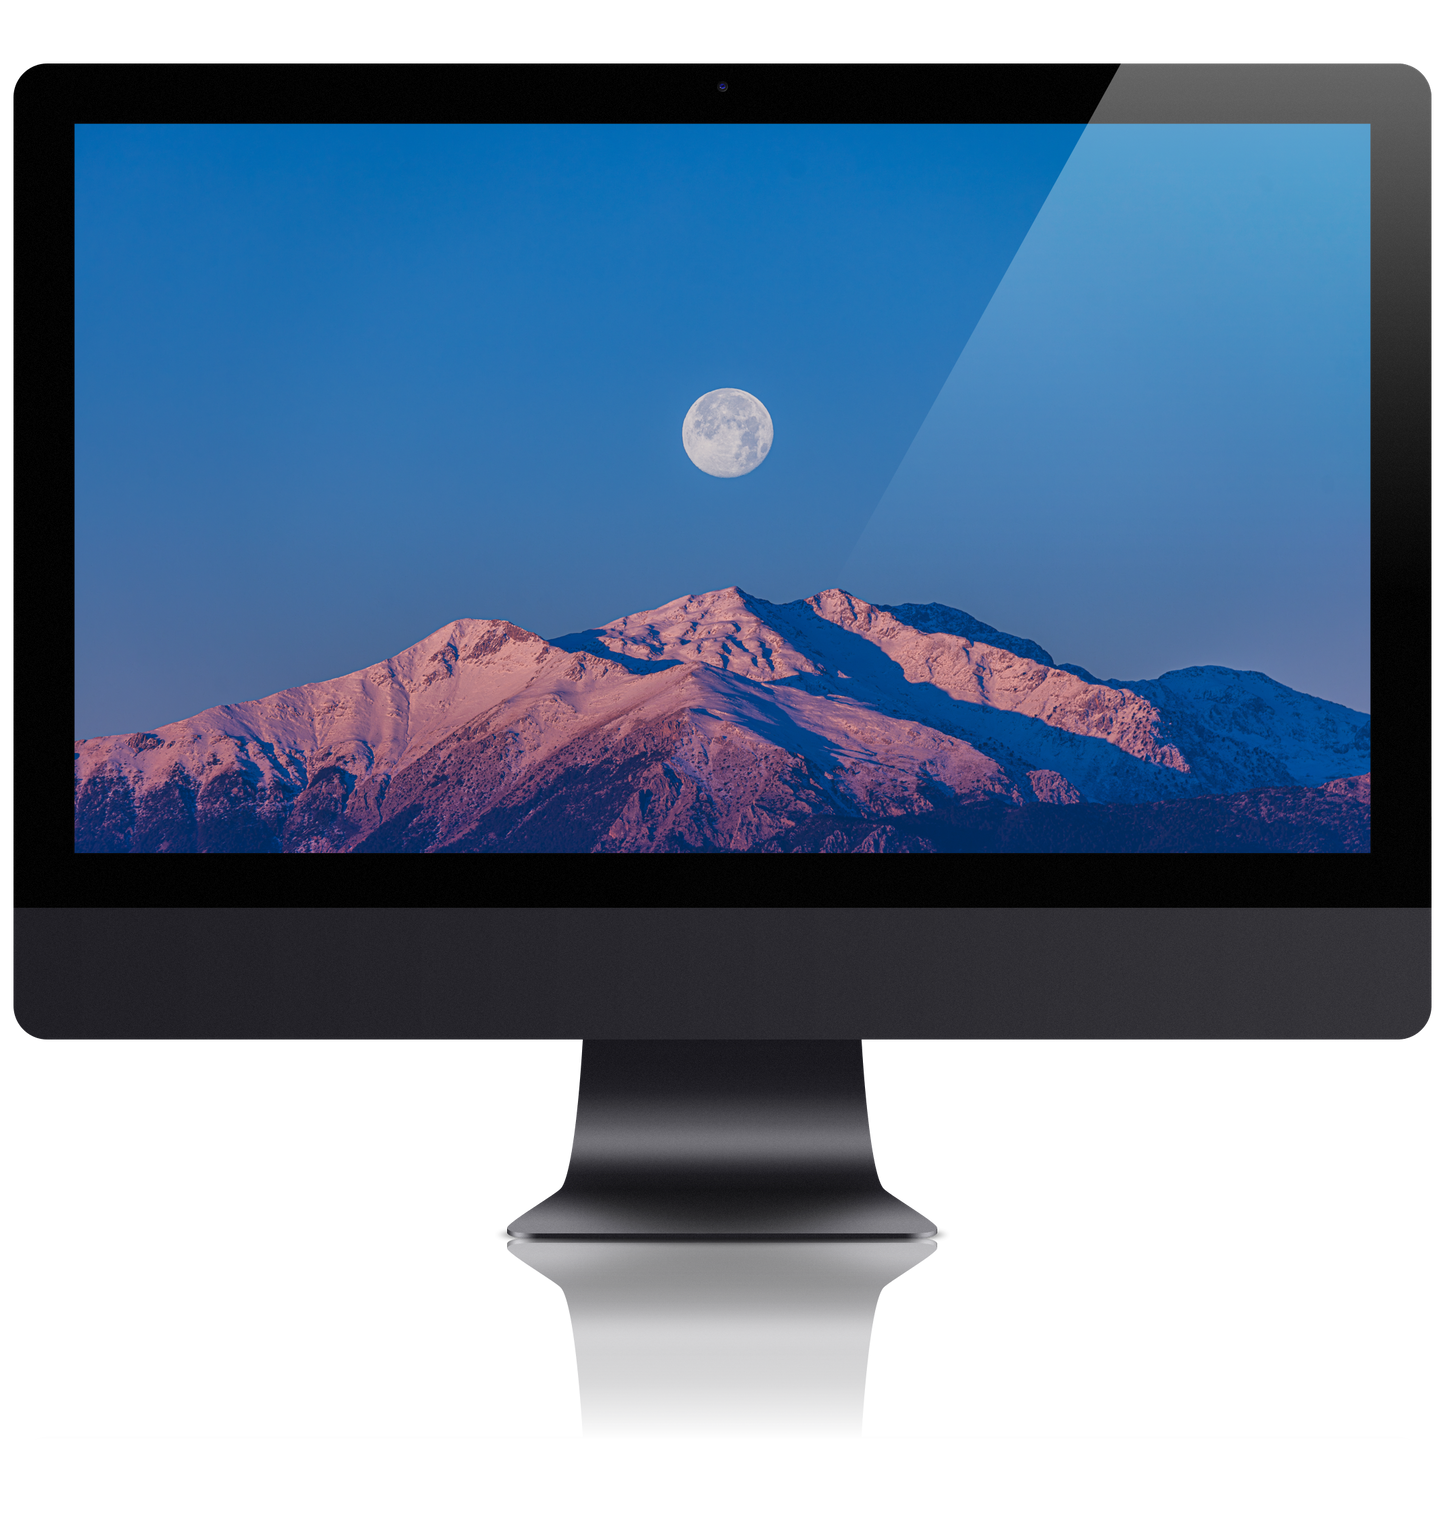 Full Cold Moon Over Bey Mountains Wallpaper Bundle